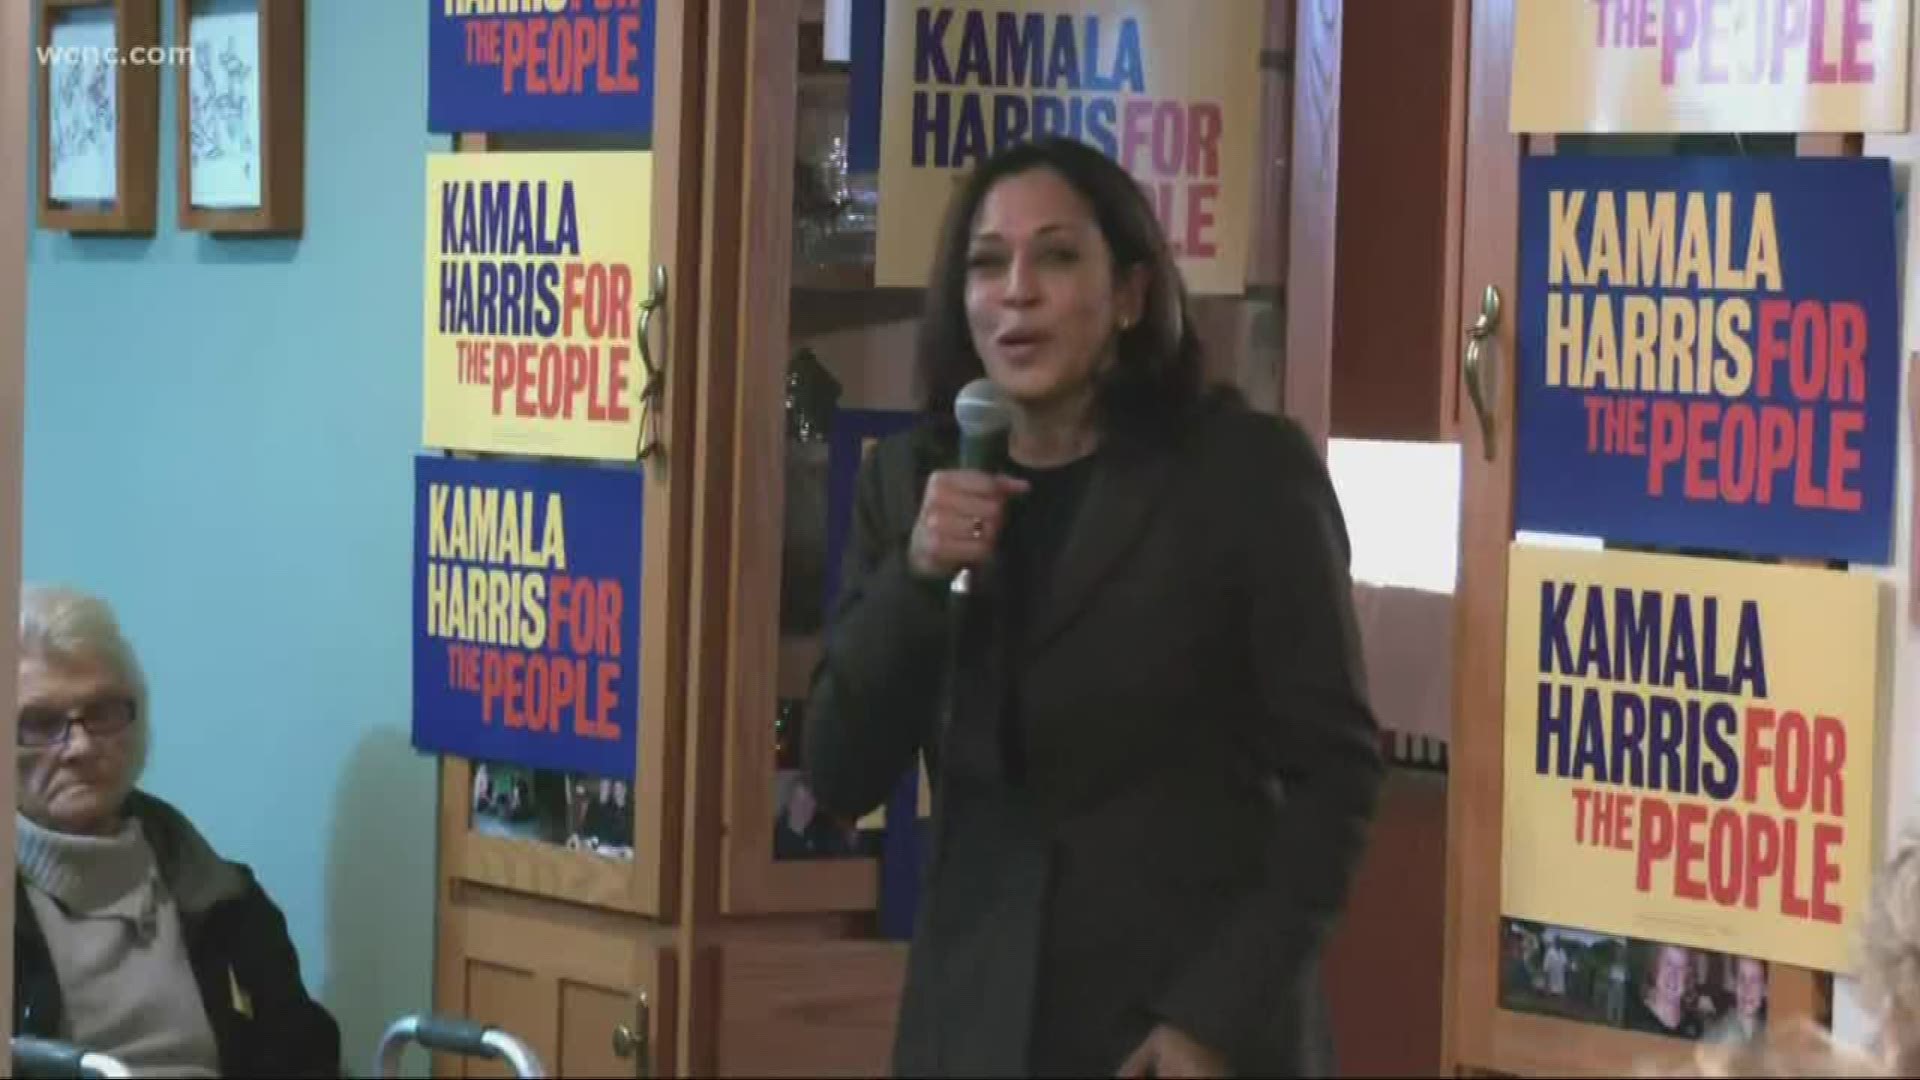 Kamala Harris' presidential campaign will return to SC Monday. Harris is holding a "Justice for Veterans" campaign in Greenwood before heading to Greenville.